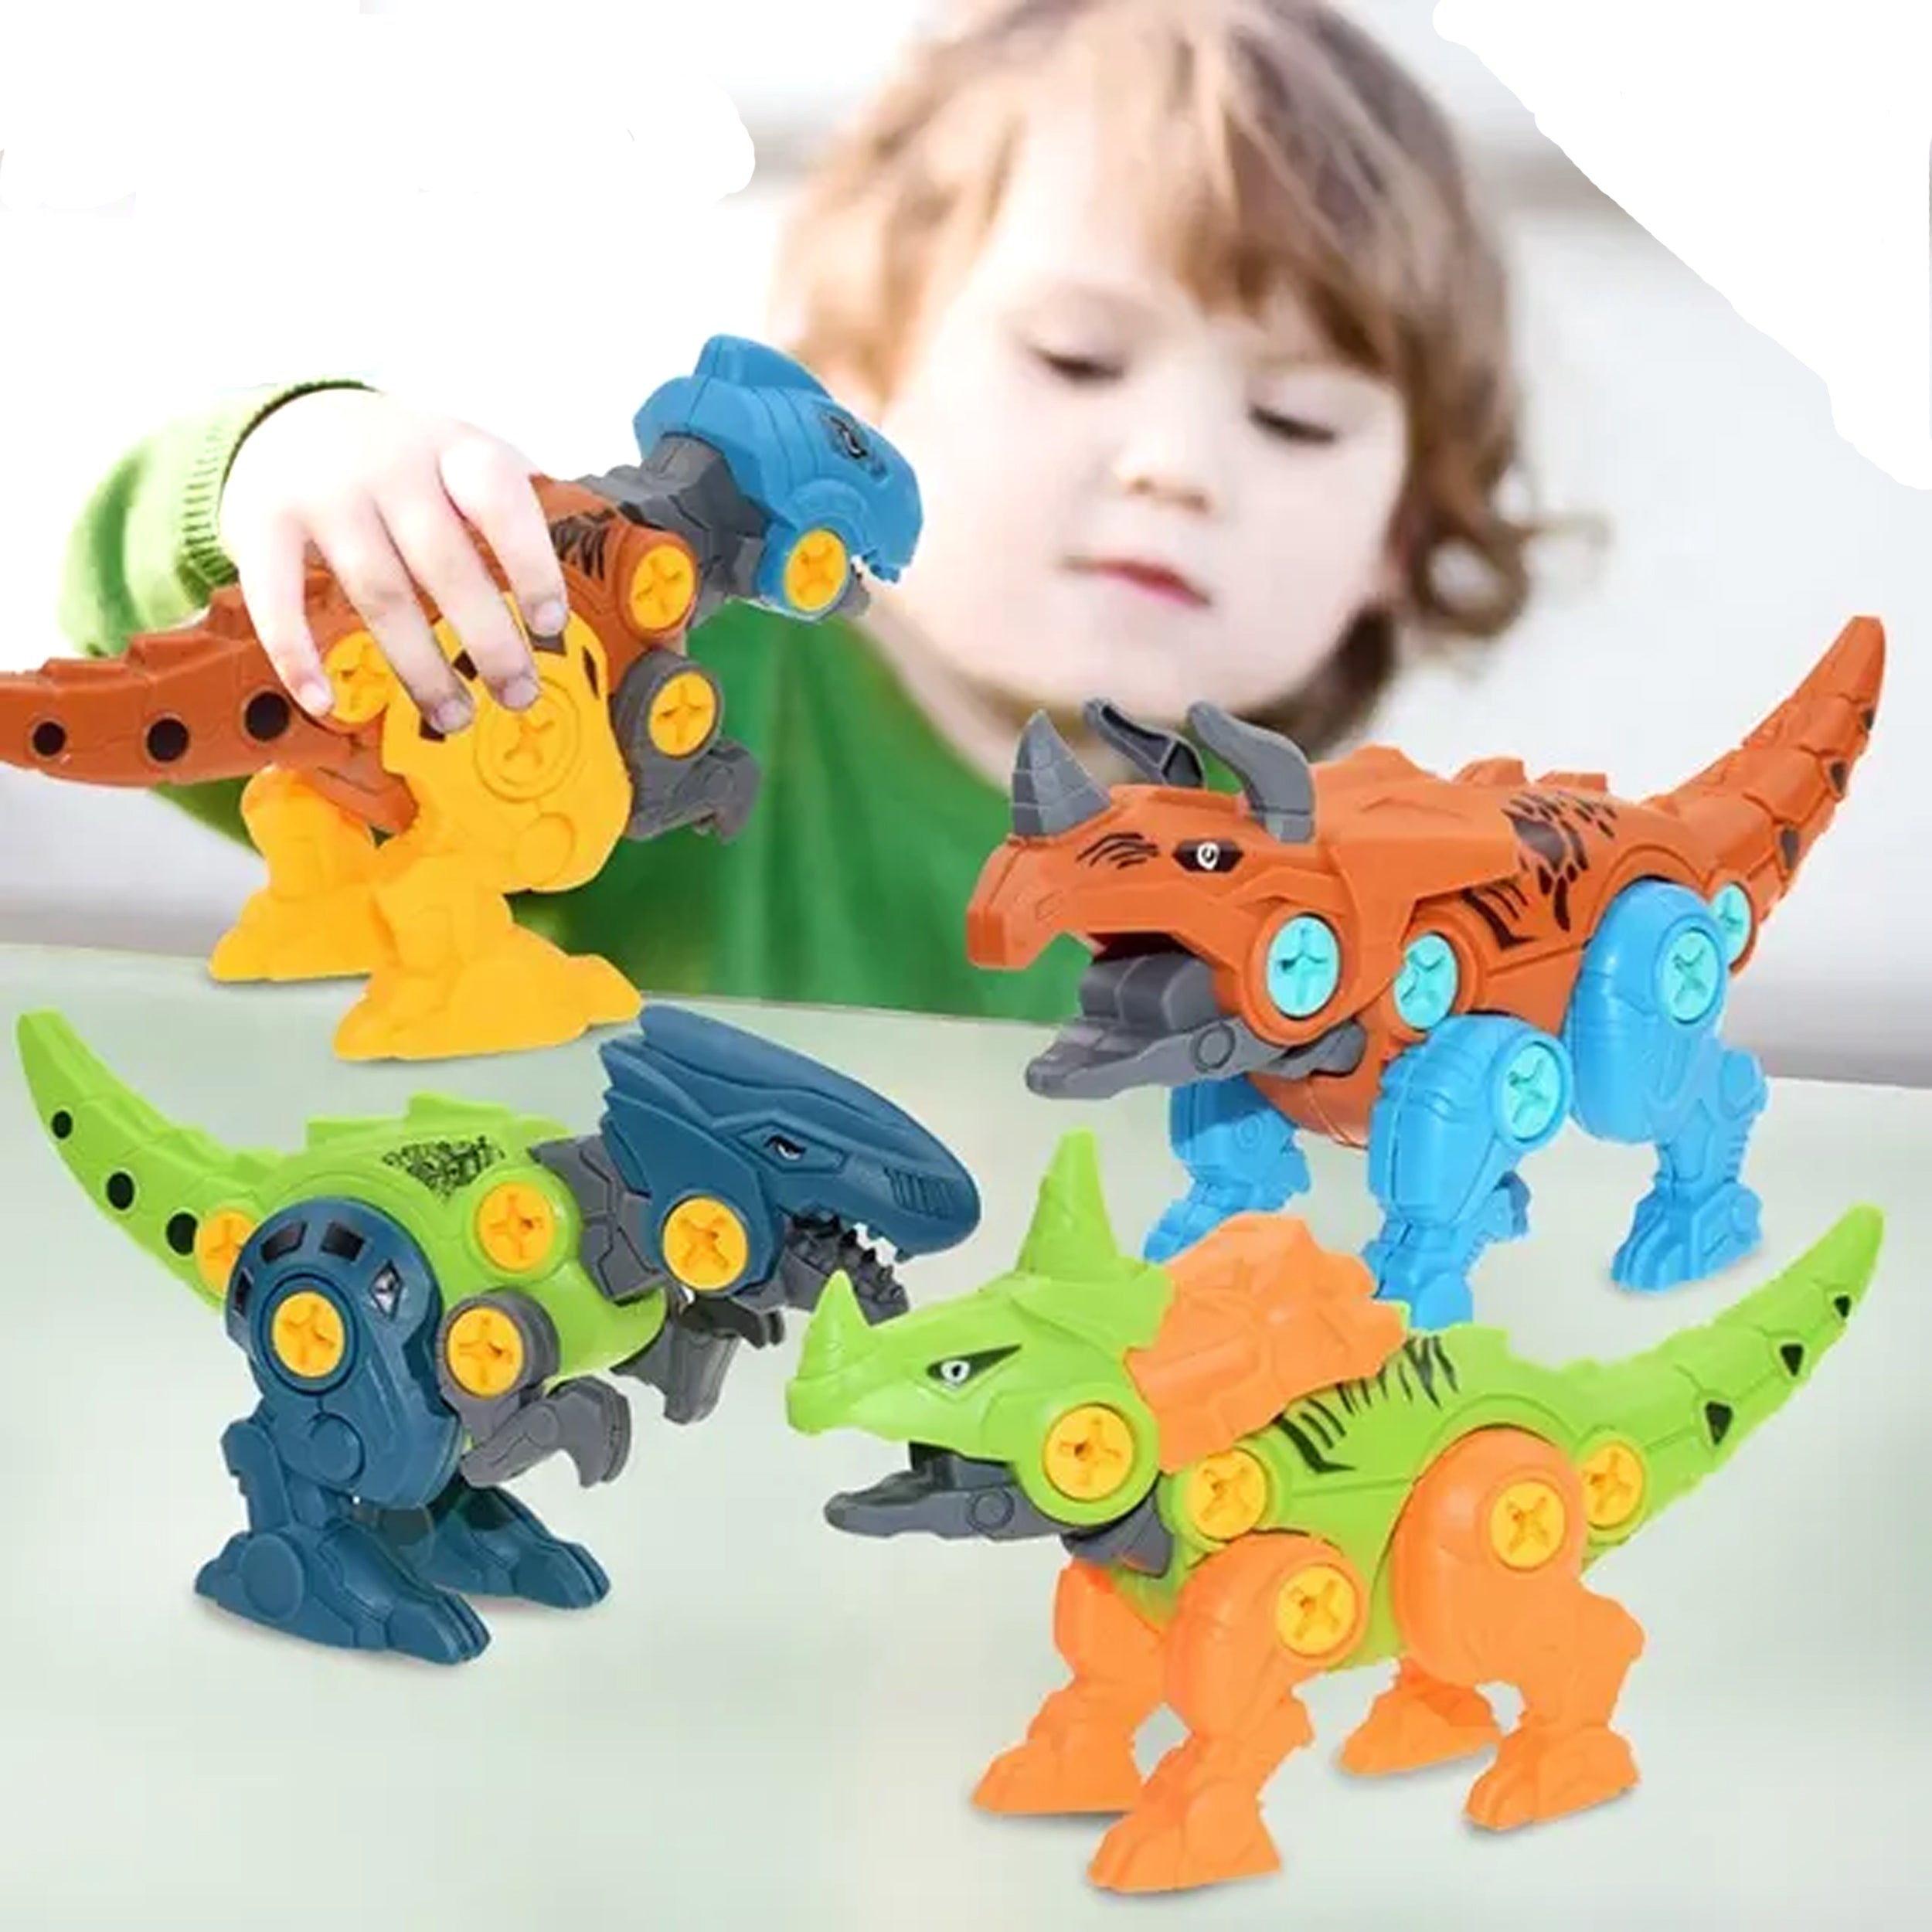 Dinosaur Toy with Drill Assembly - A Fun and Interactive Playset for Kids